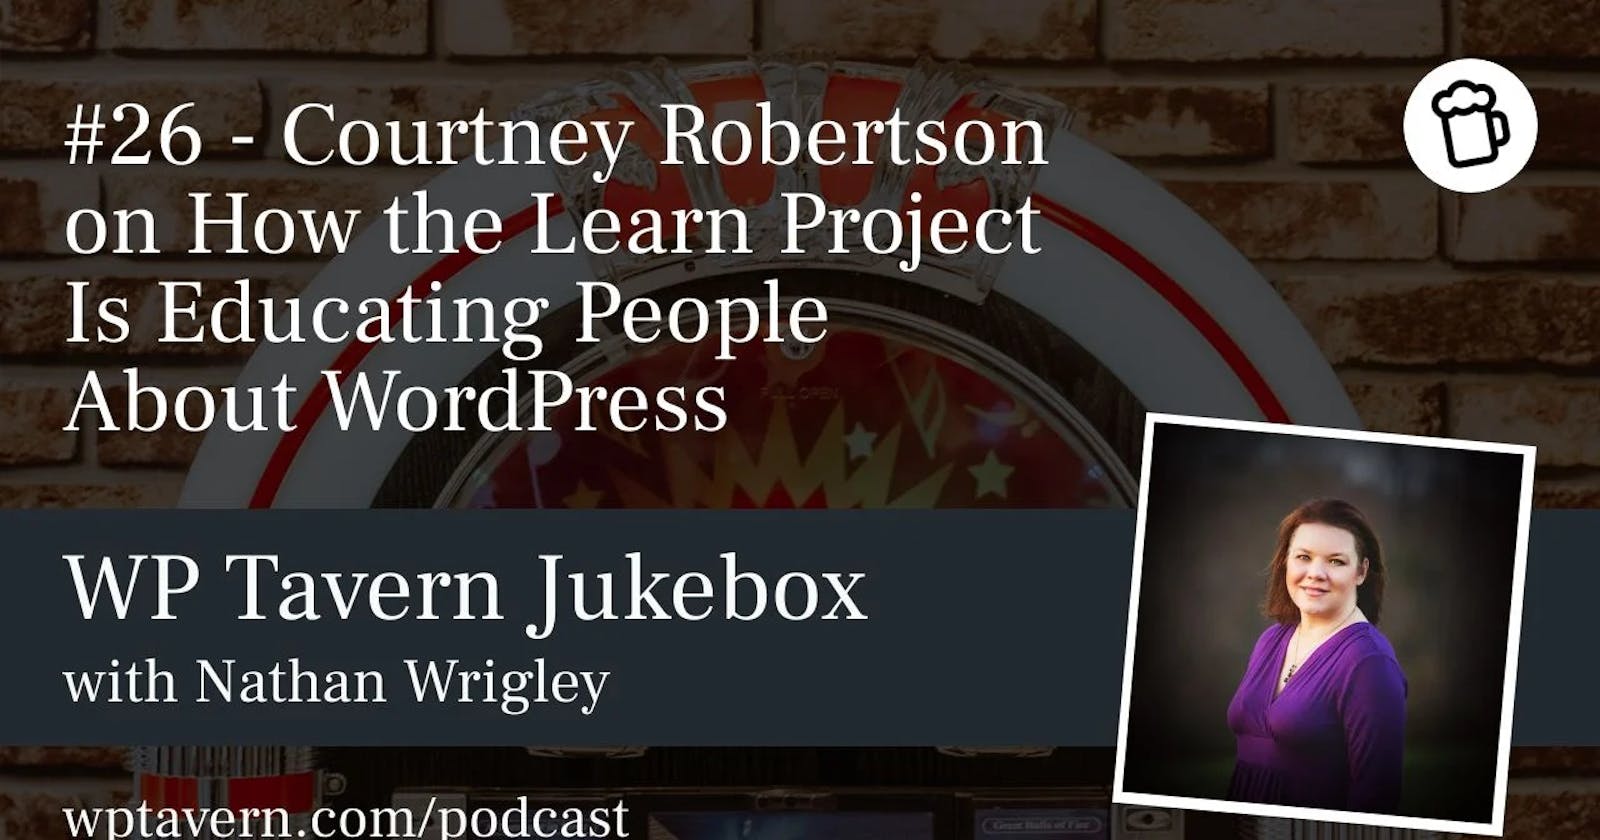 WP Tavern #26 – Courtney Robertson on How the Learn Project Is Educating People About WordPress